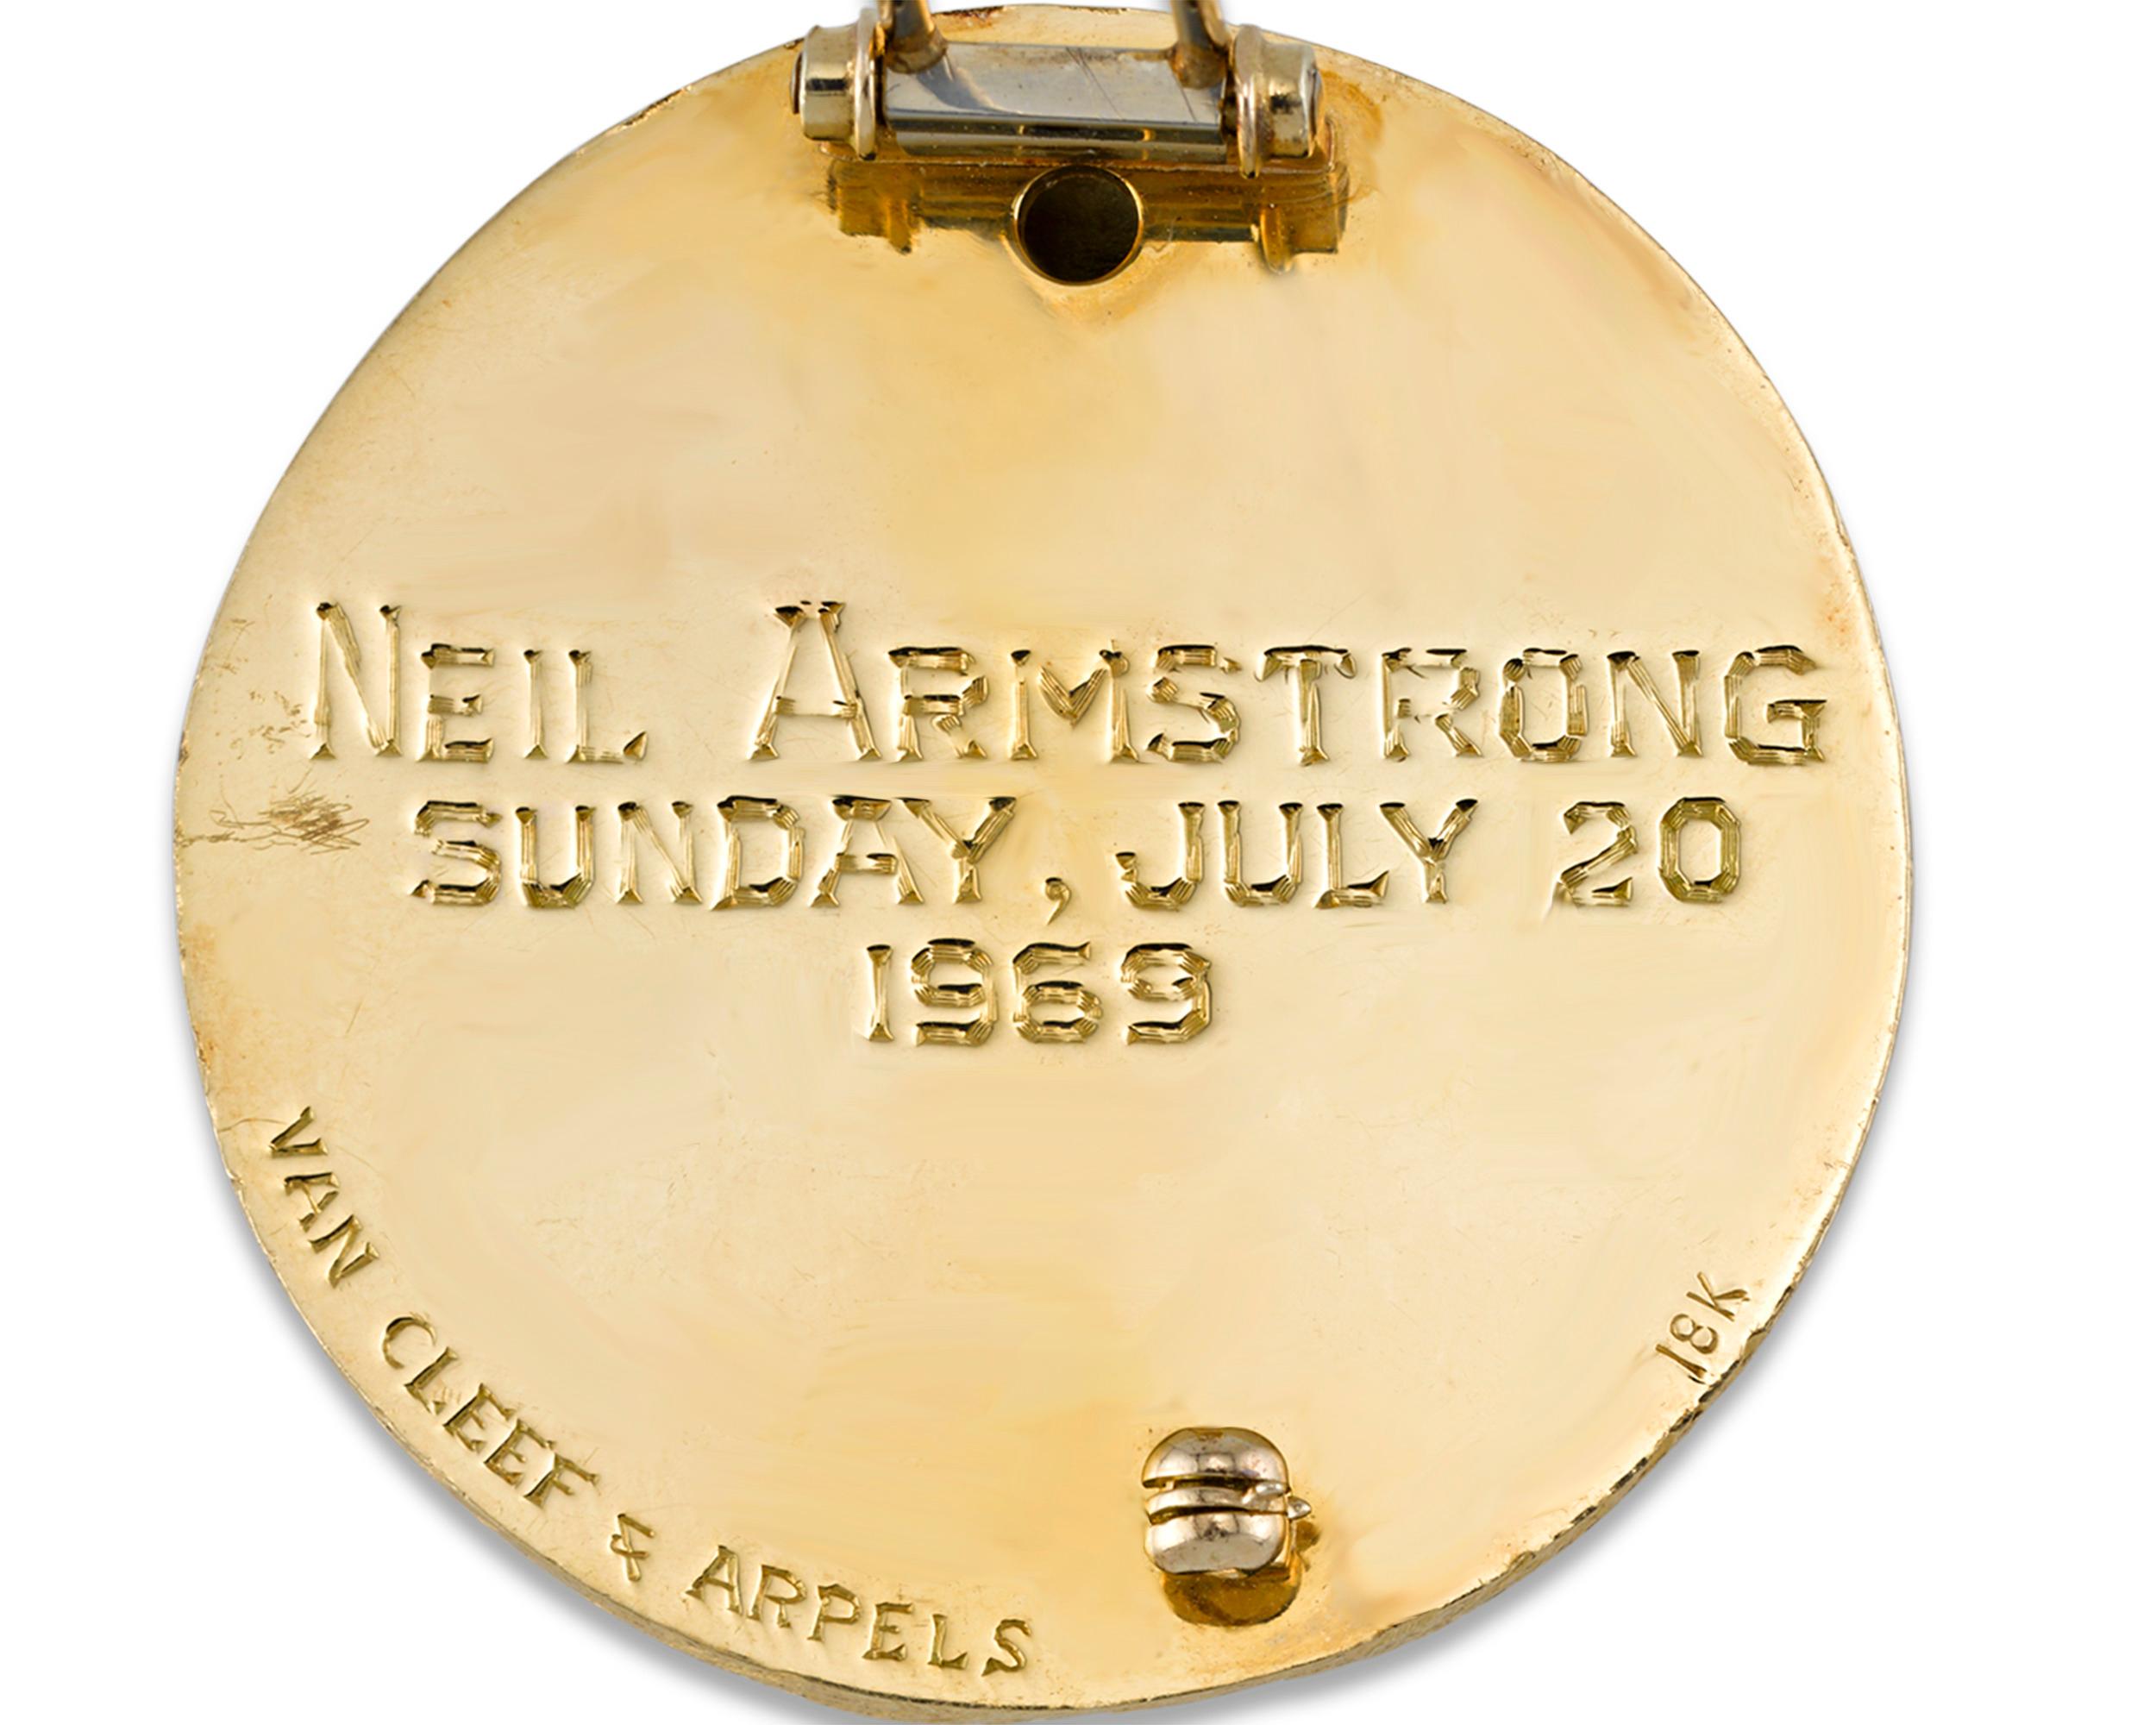 This one-of-a-kind brooch boasts a history that is out of this world. The piece was crafted by the legendary jewelers Van Cleef & Arpels and presented to Neil Armstrong after his famed mission aboard Apollo 11. The brooch commemorates Armstrong's